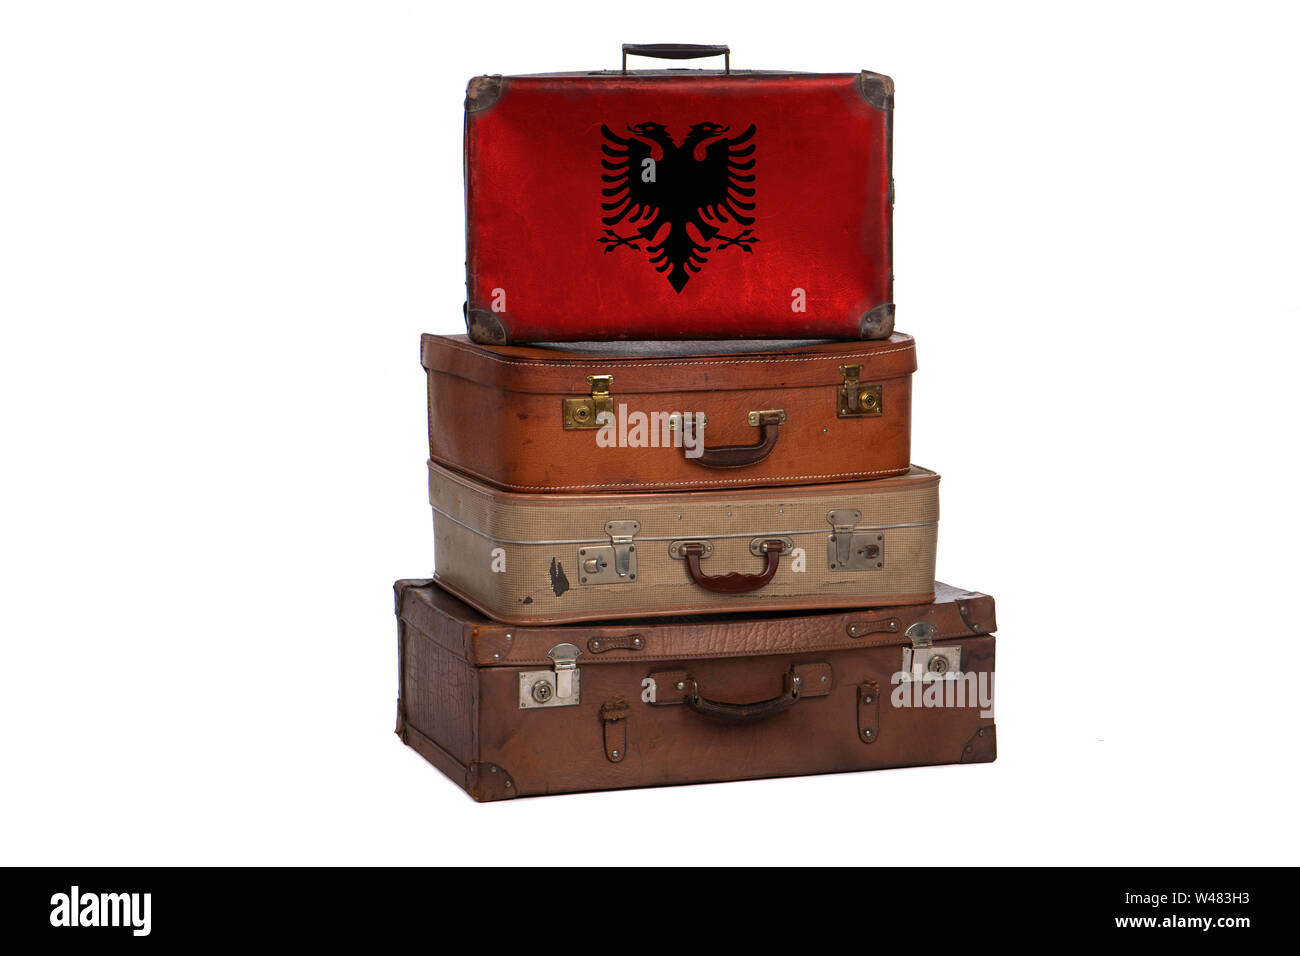 Albania, Albanian travel concept. Group of vintage suitcases isolated on white background Stock Photo